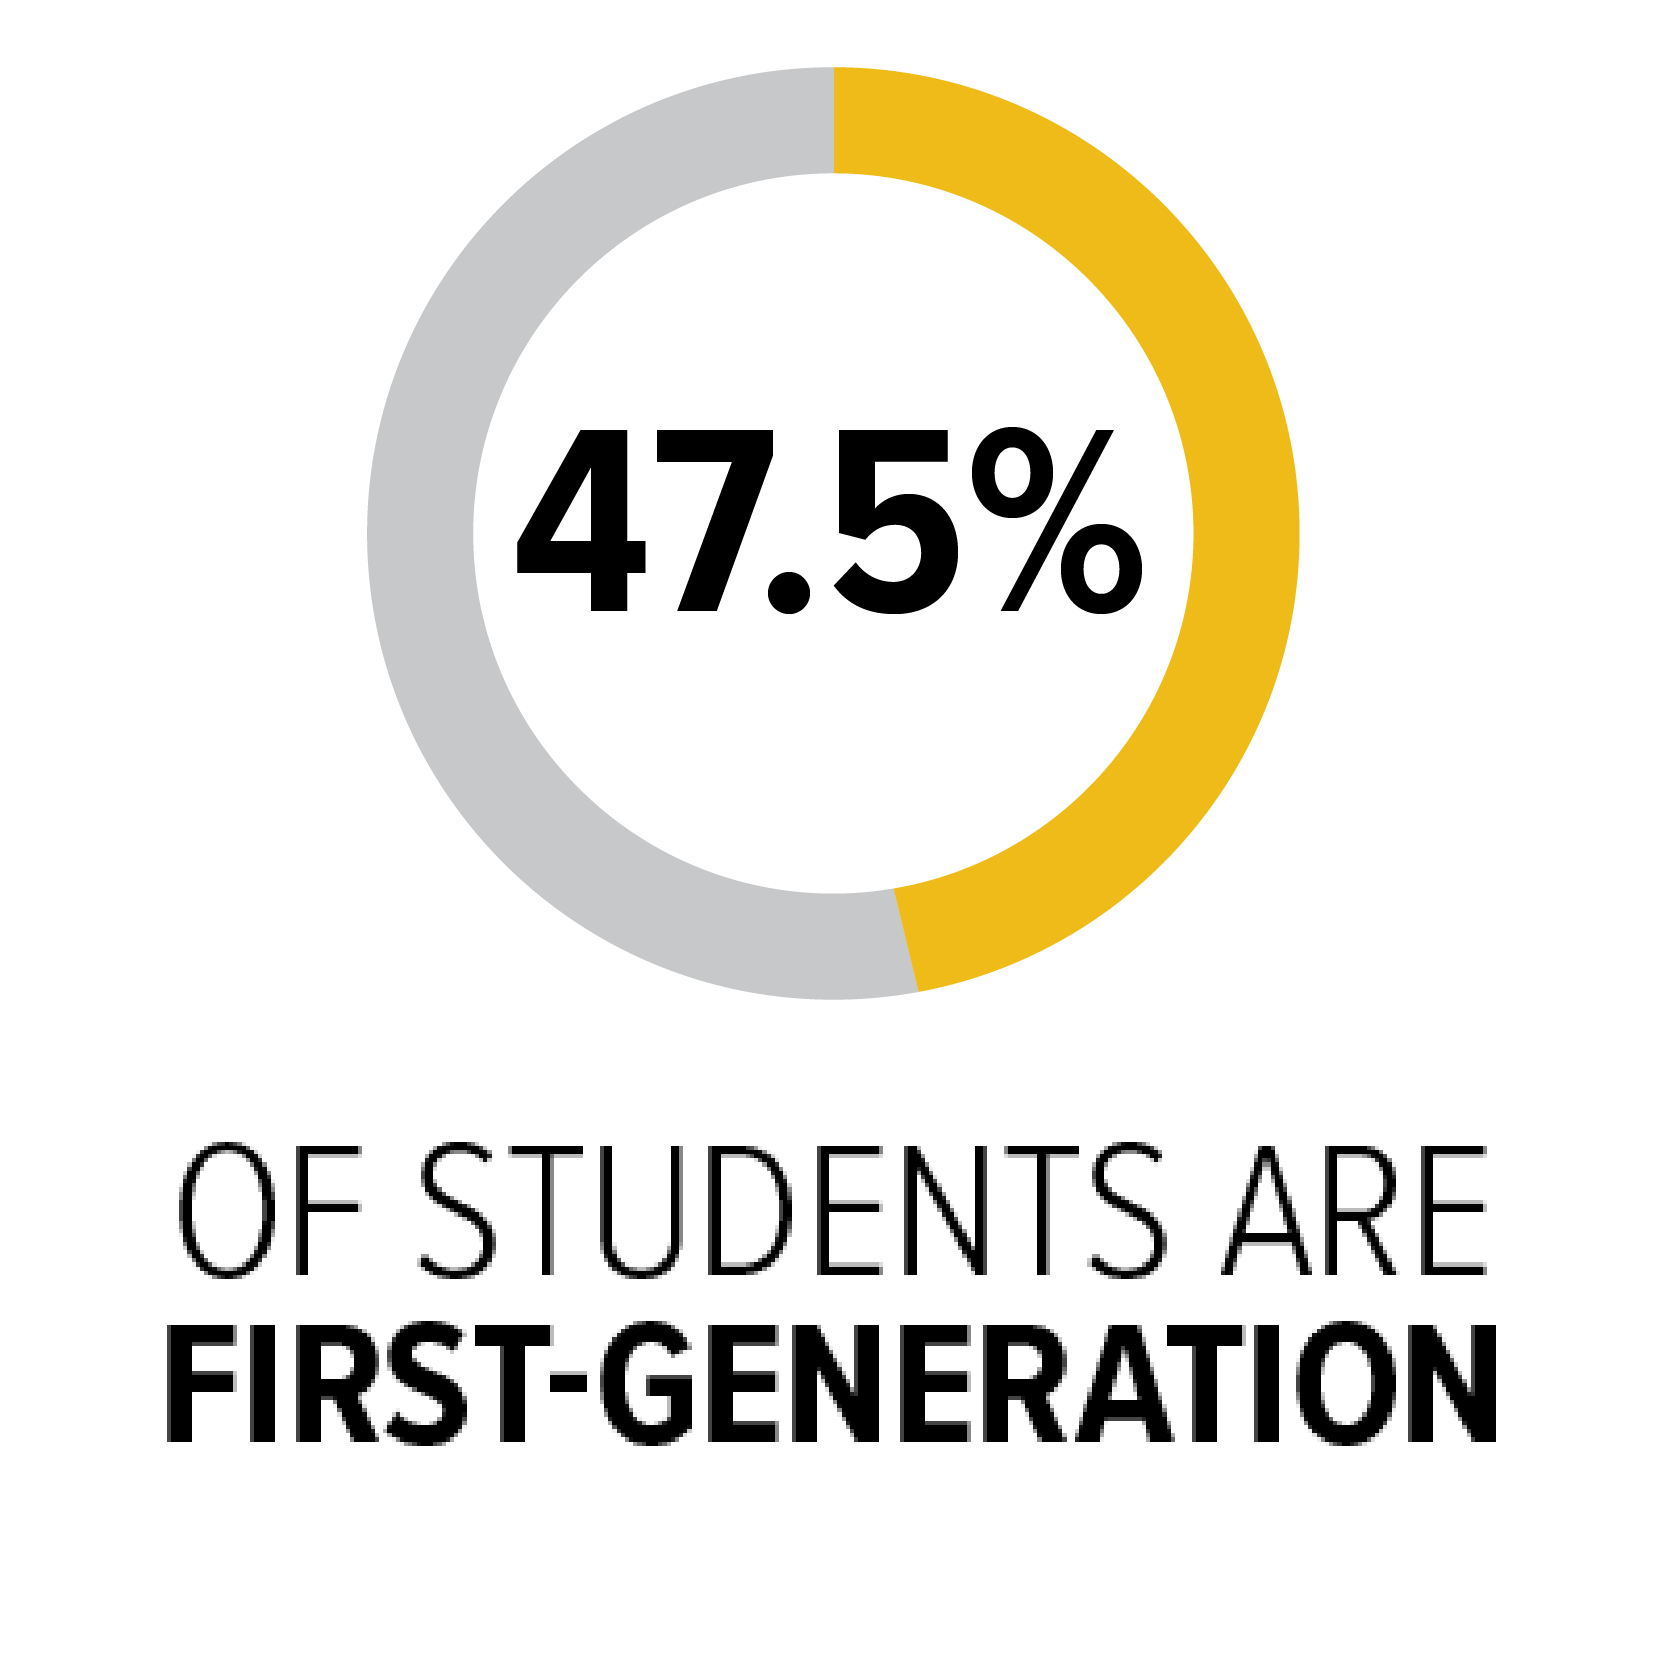 47.5 percent of students are first-generation